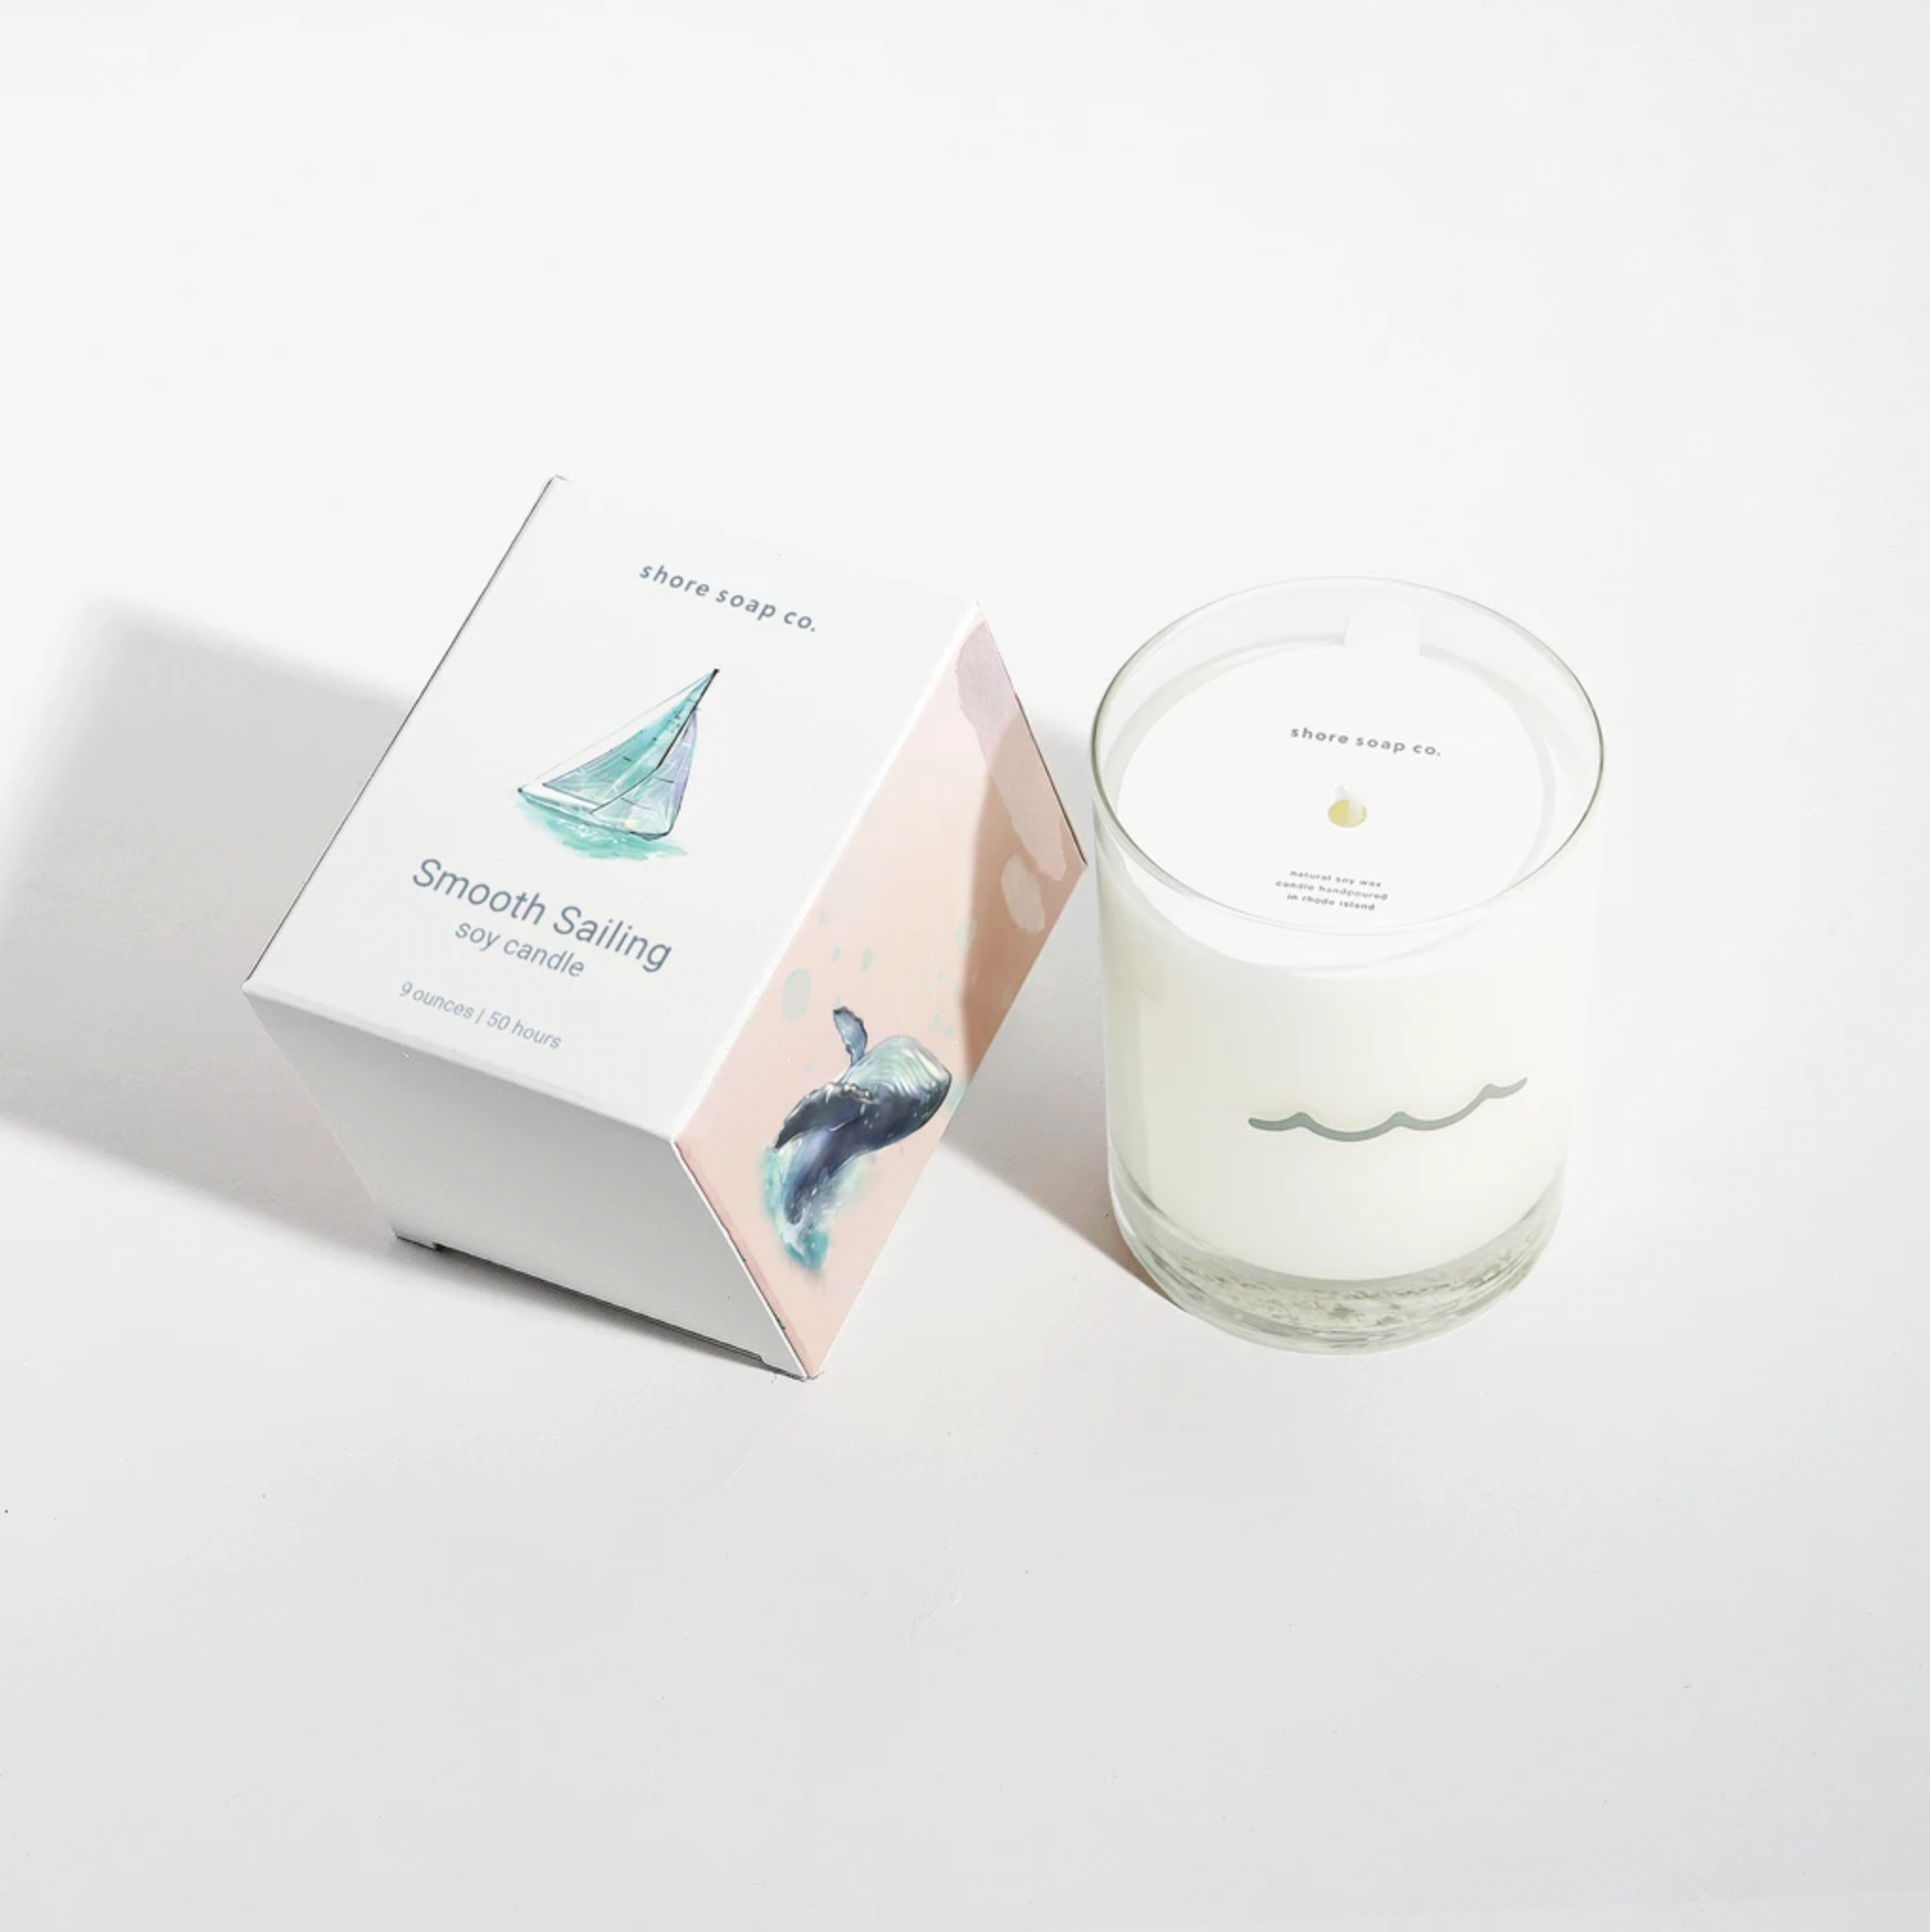 SHORE SOAP CANDLE- Smooth Sailing, Shore Soap Candle, Soy candle